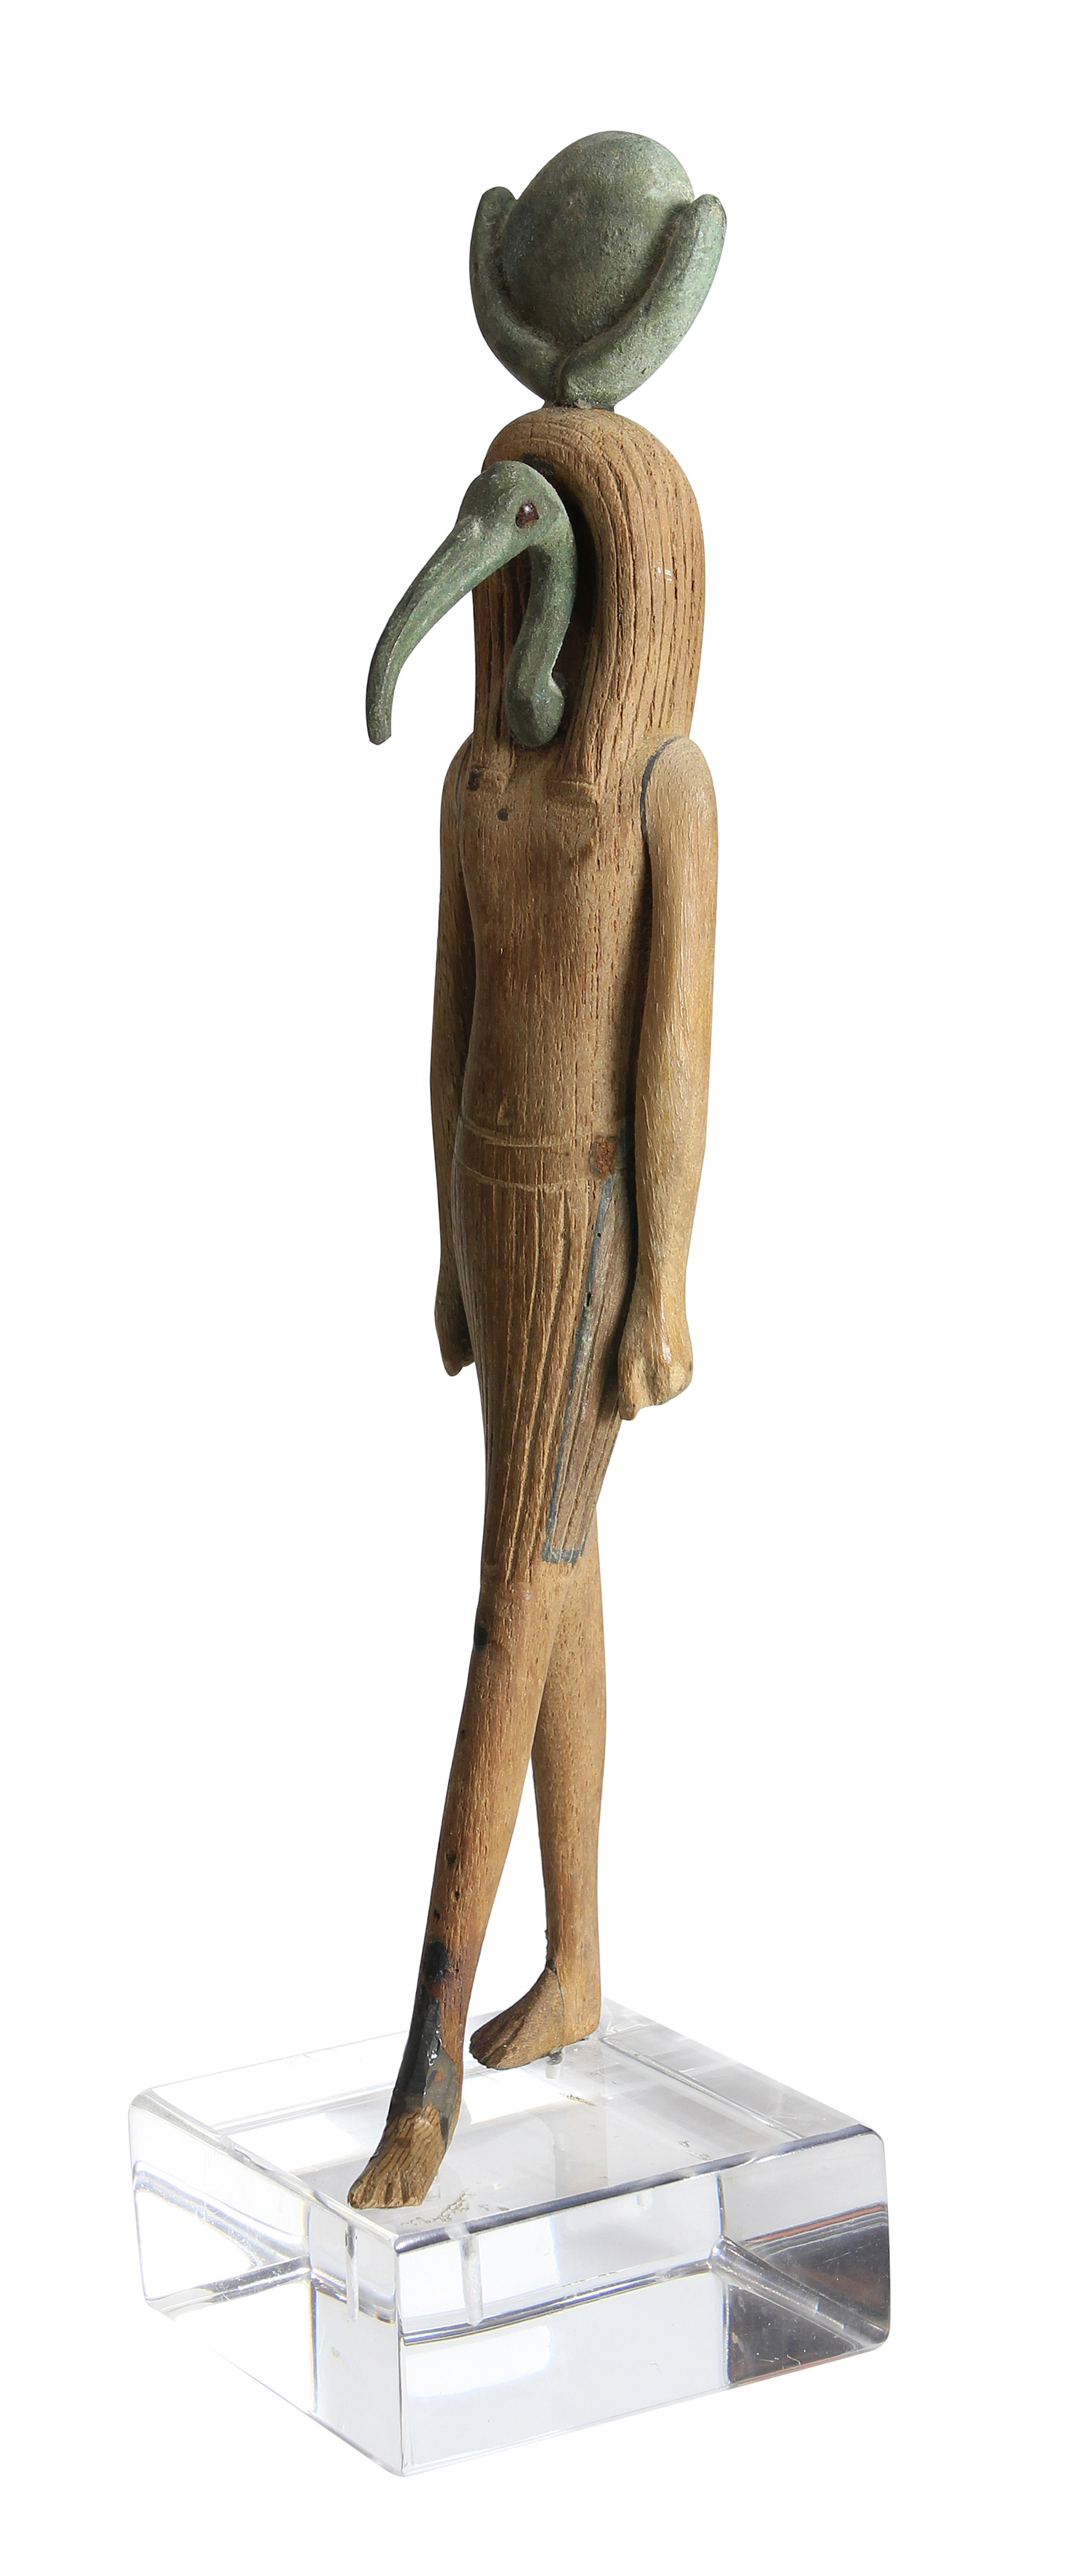 An ancient Egyptian bronze and wood figure of Thoth 715-332 B.C.E